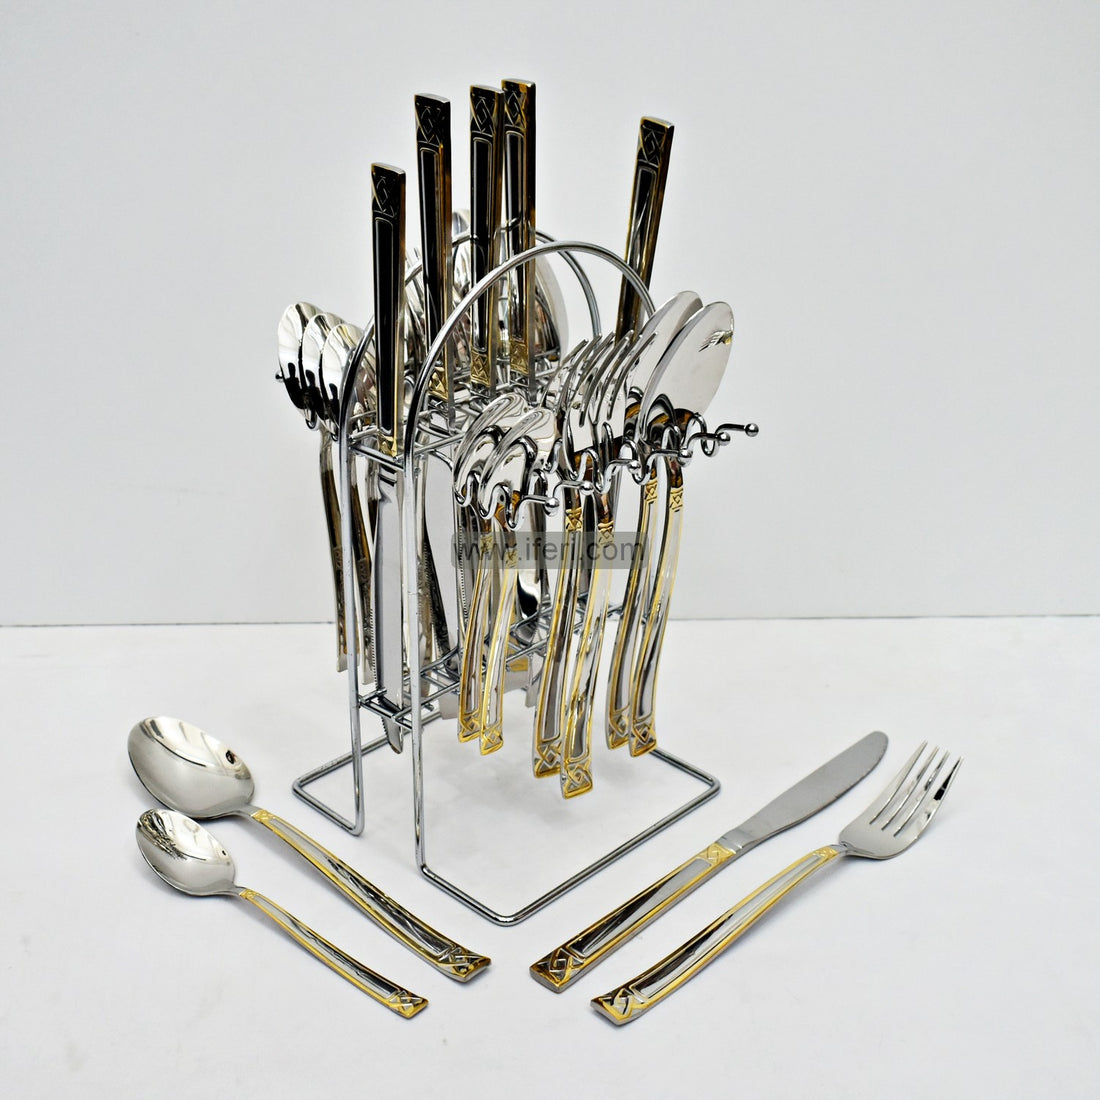 Buy 24 Pcs Stainless Steel Cutlery Set through Online from iferi.com in Bangladesh